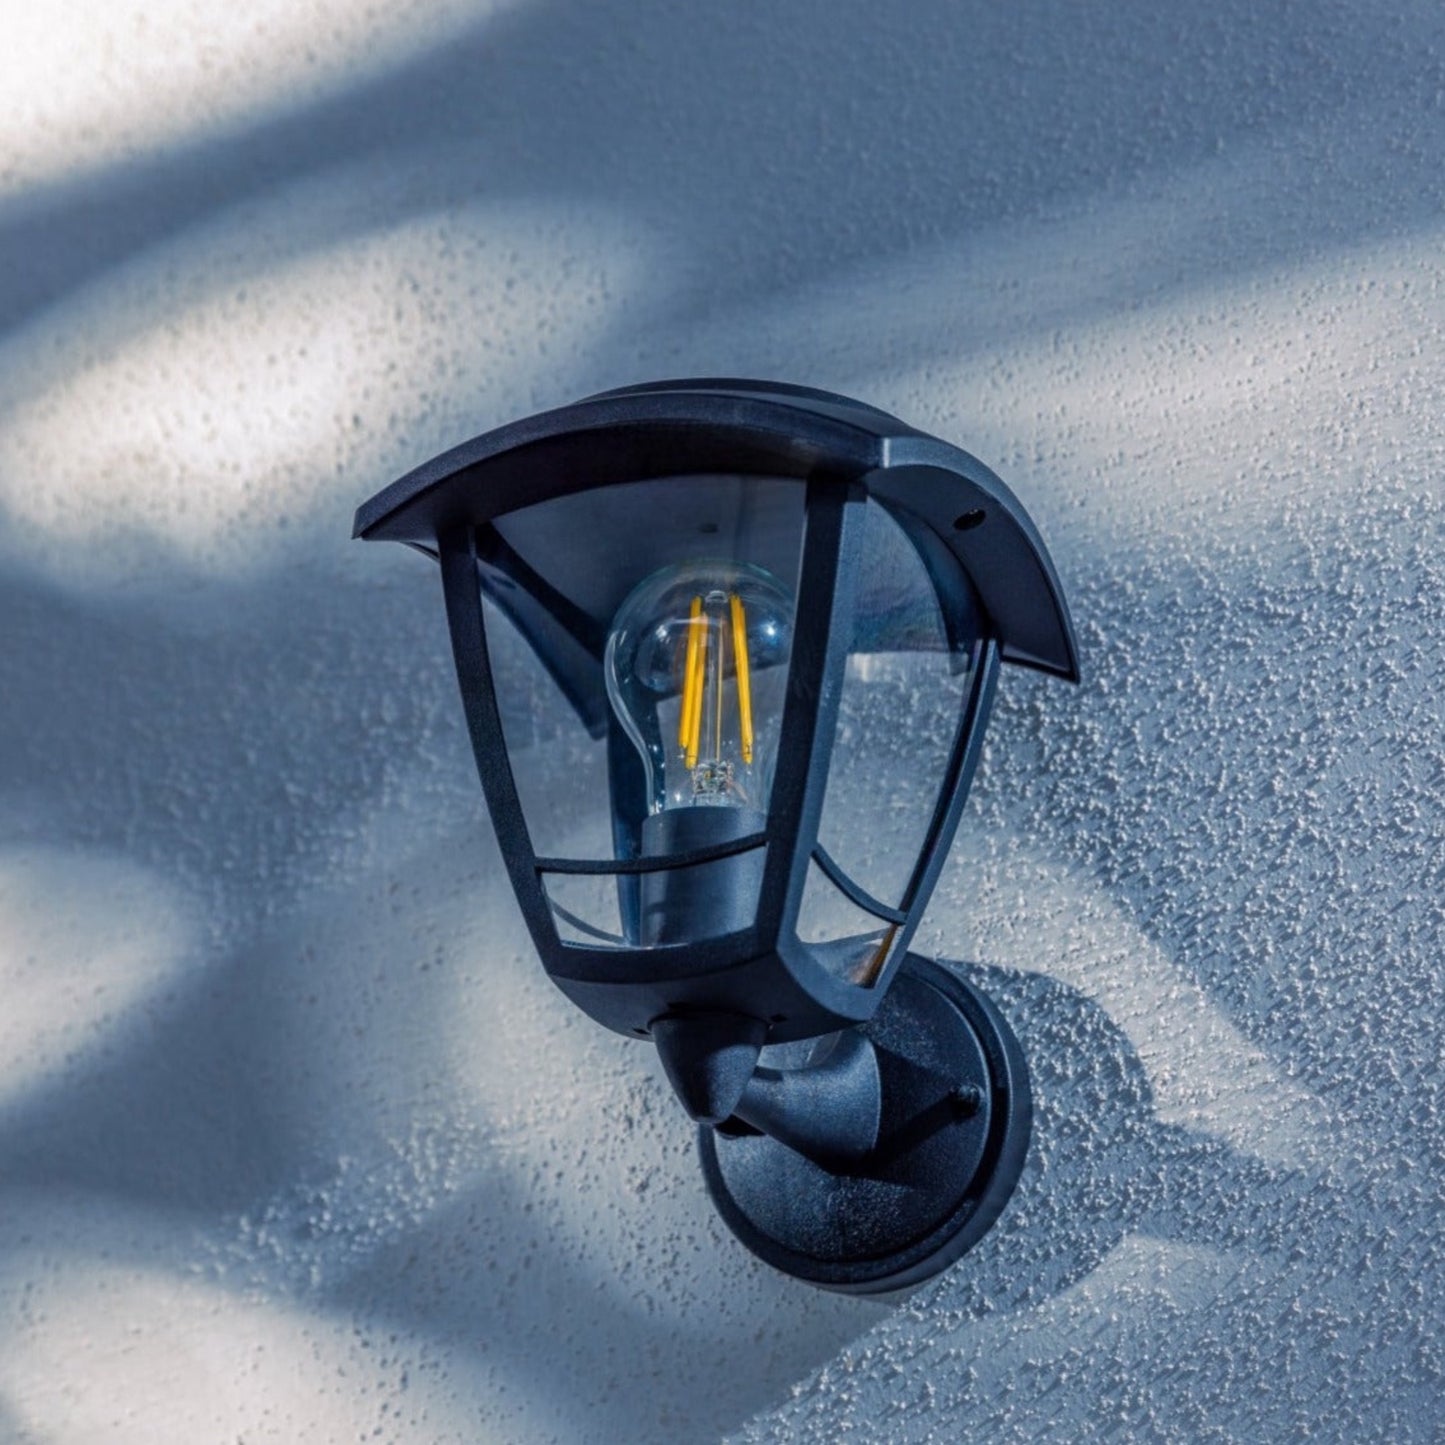 Create an aesthetically pleasing lighting system around your home with our Lara solar lantern light for your walls. This product is featured as an elegant and traditional lantern wall light design, constructed from black polycarbonate and fitted with clear polycarbonate diffusers.